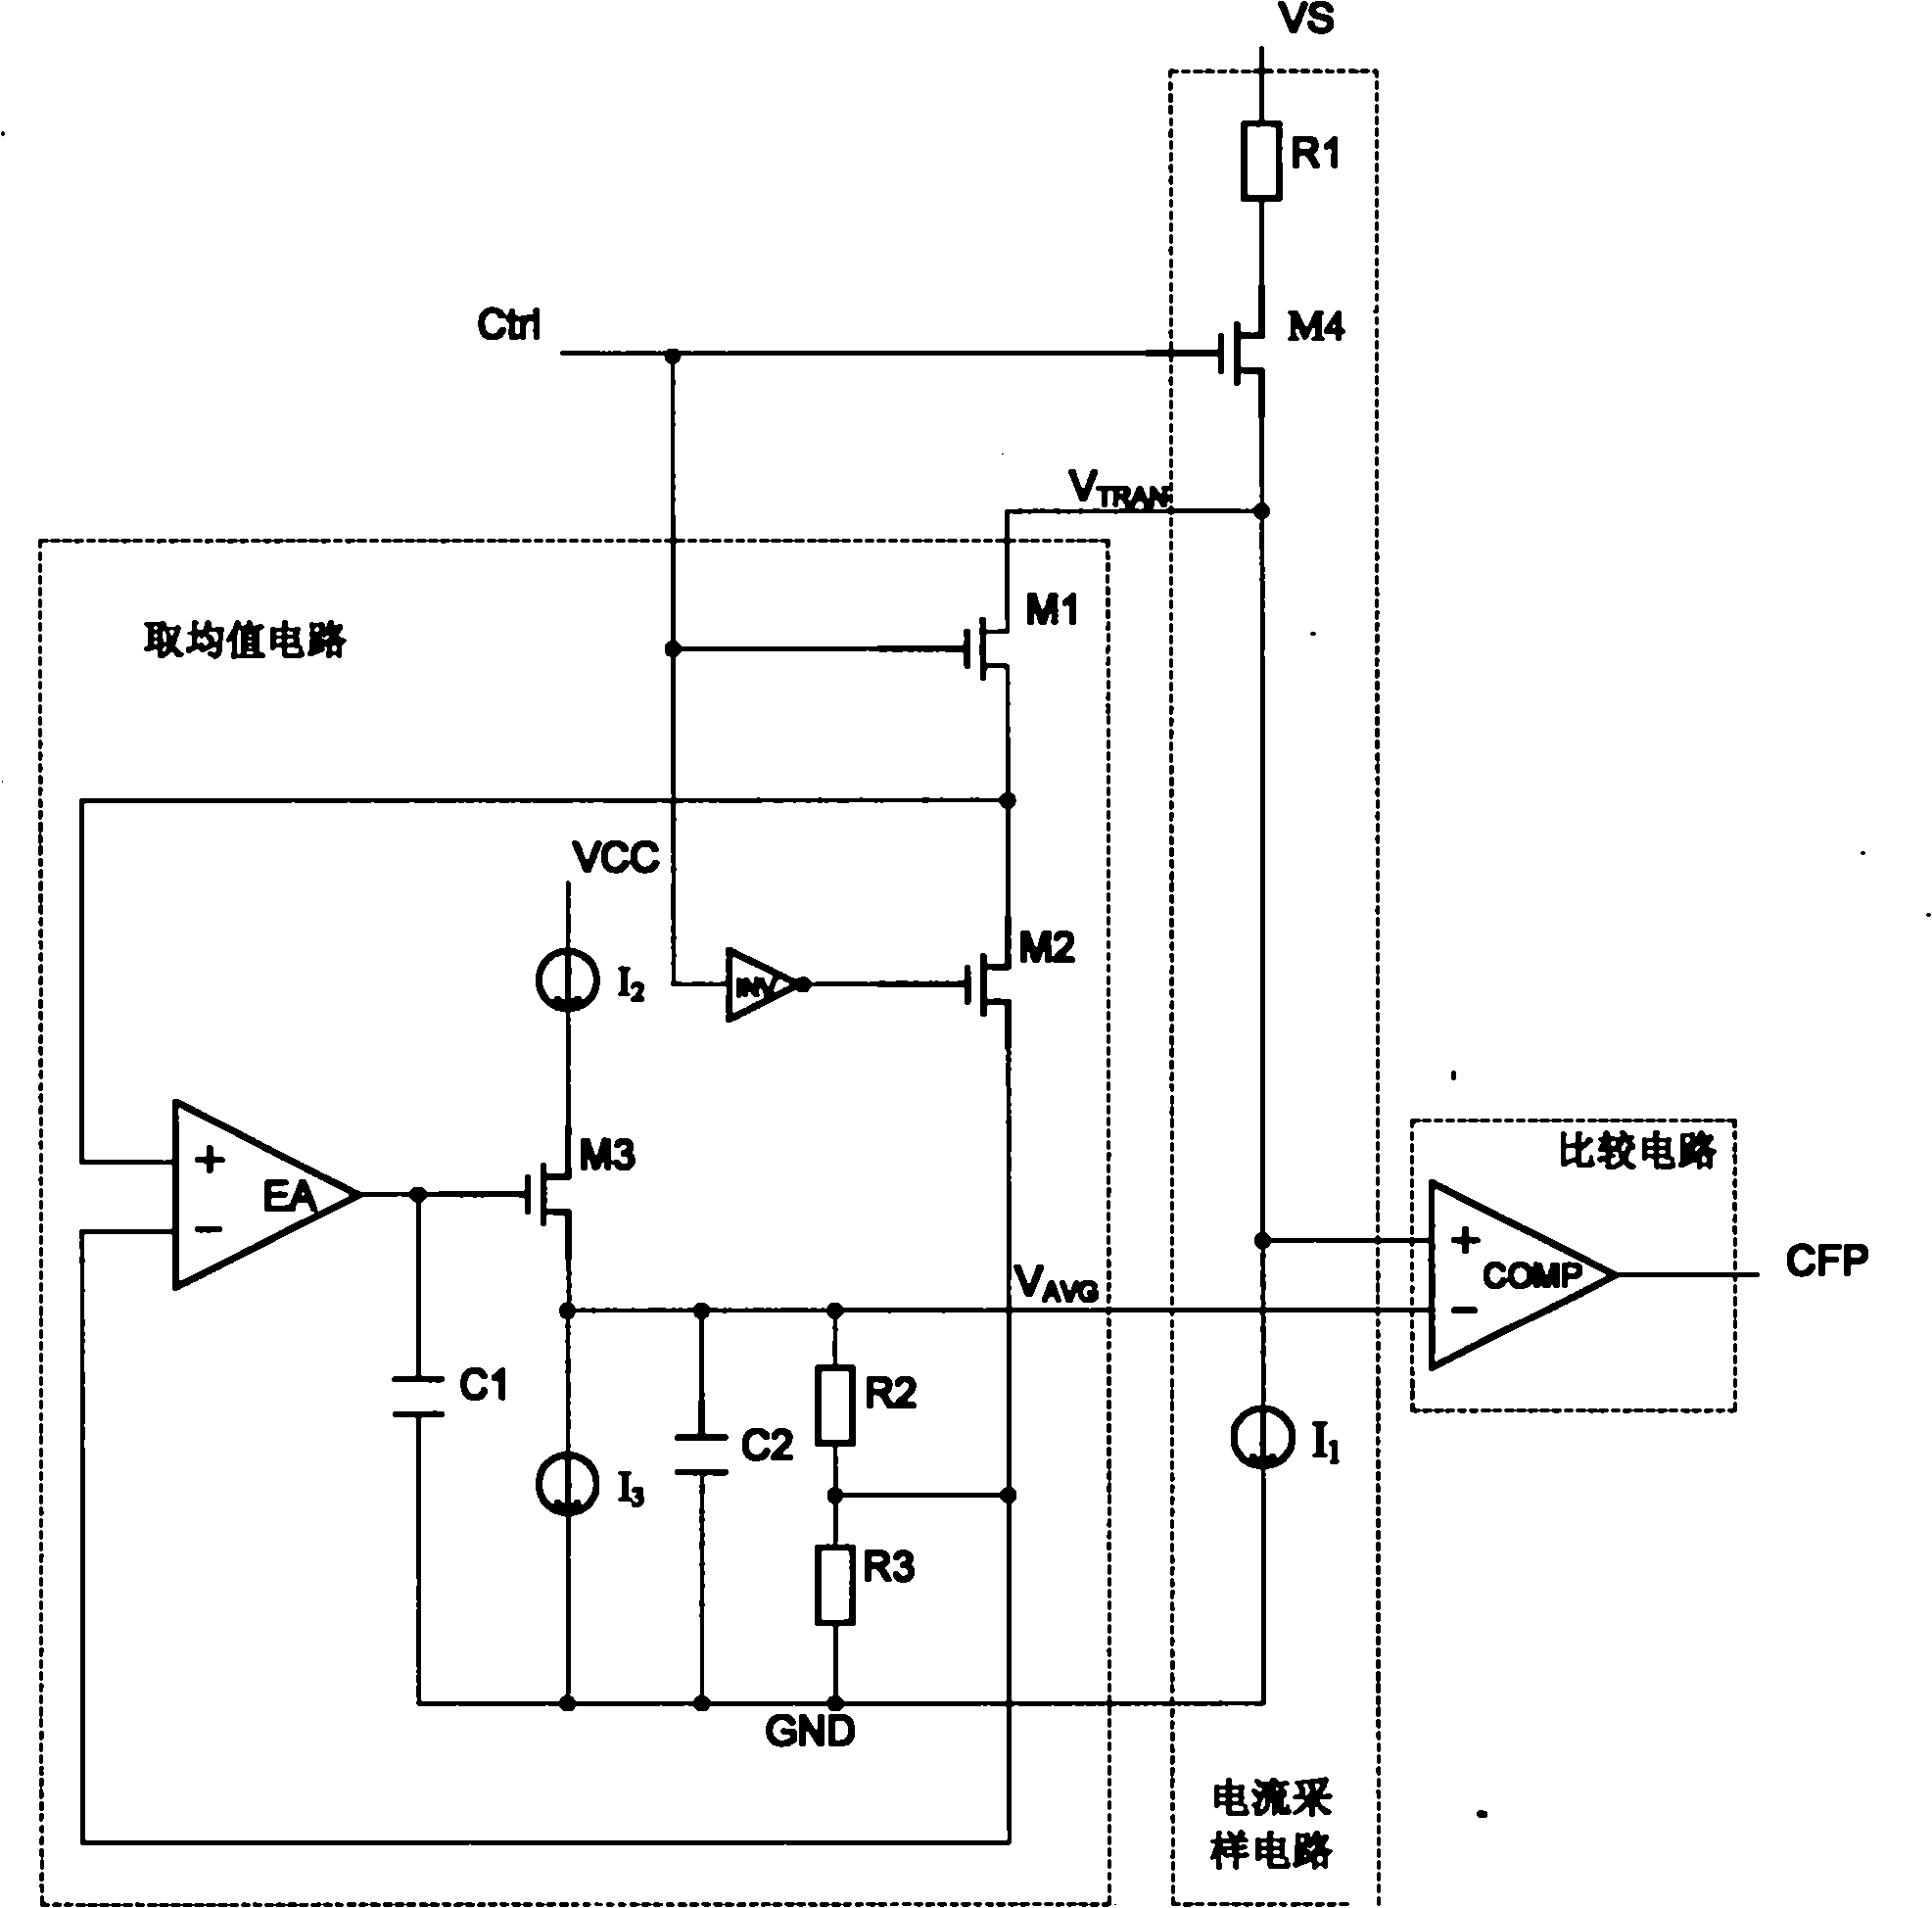 Crest factor overcurrent protection circuit applied to electronic ballast